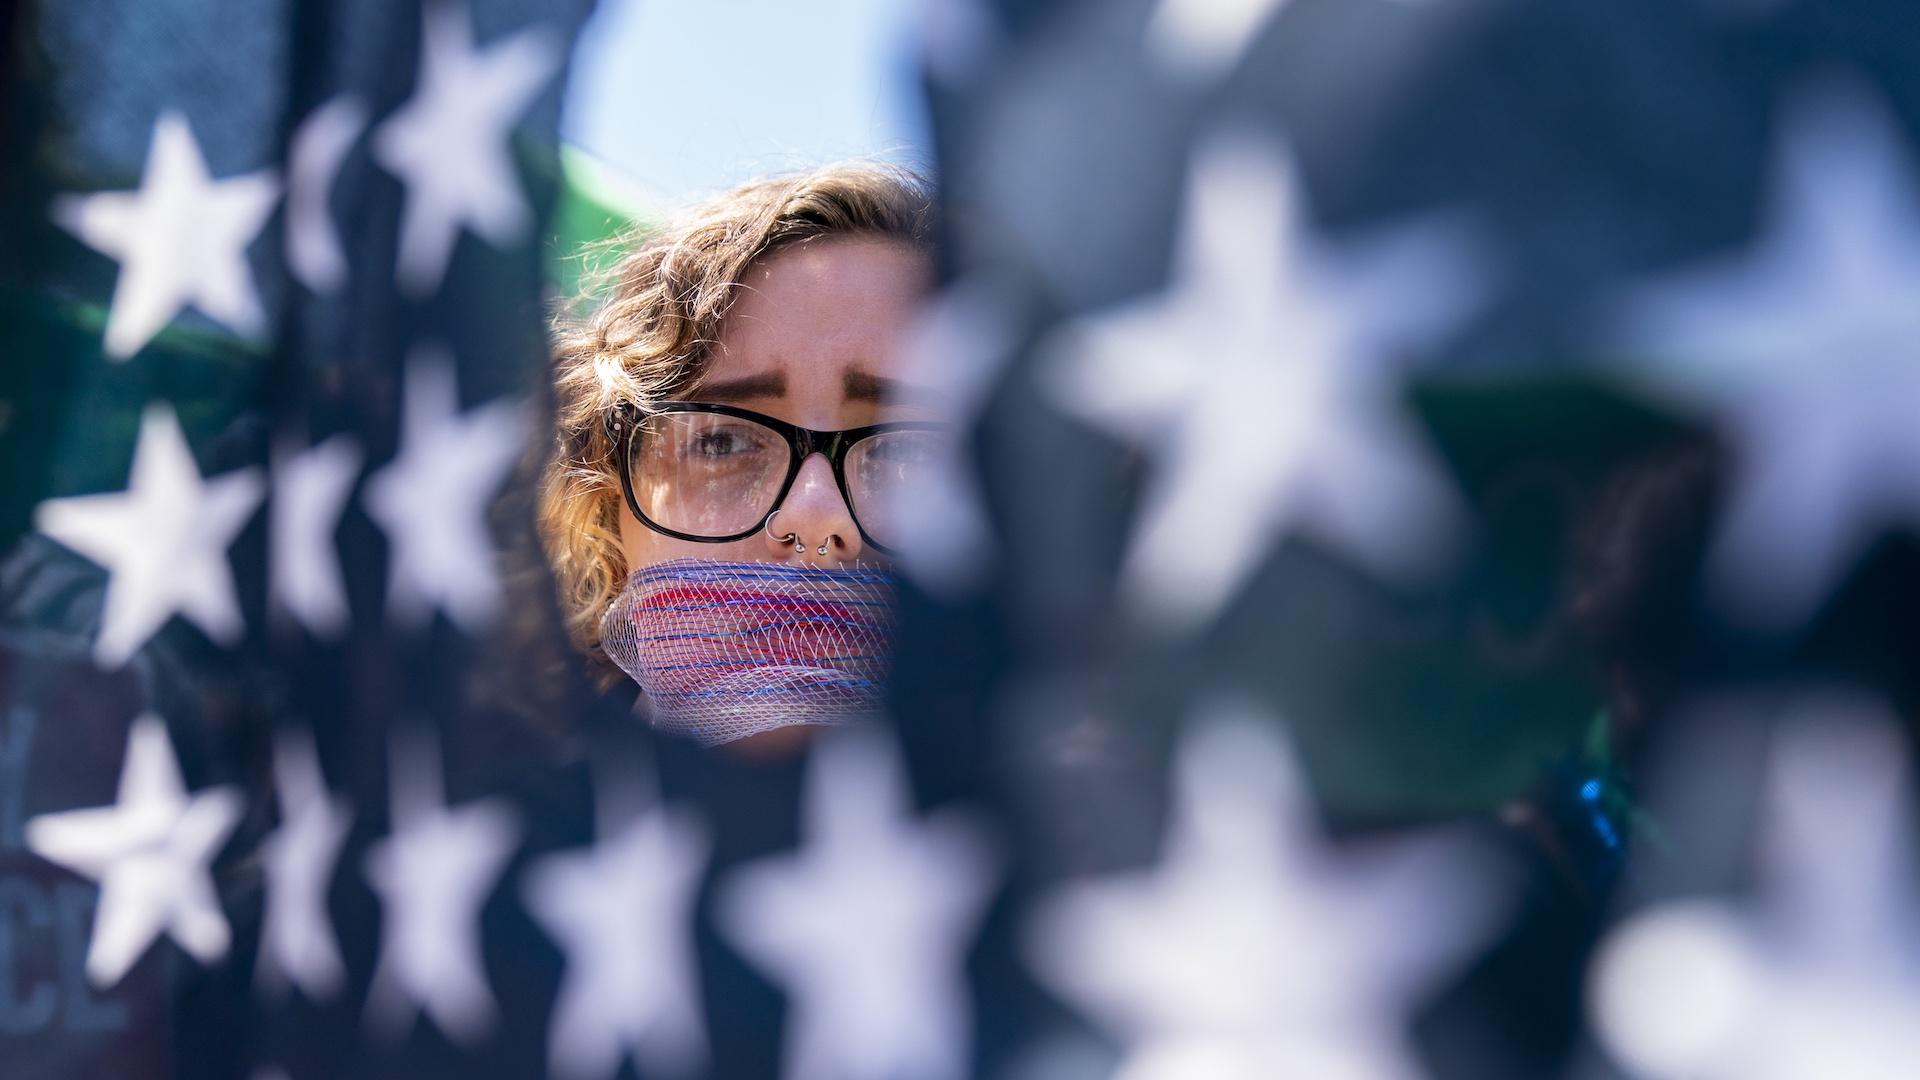 Emma Rousseau of Oakland, N.J., her mouth bound with a red, white and blue netting, attends a rally on the Fourth of July to protest for abortion rights, at Lafayette Park in front of the White House in Washington, Monday, July 4, 2022. (AP Photo/Andrew Harnik, File)